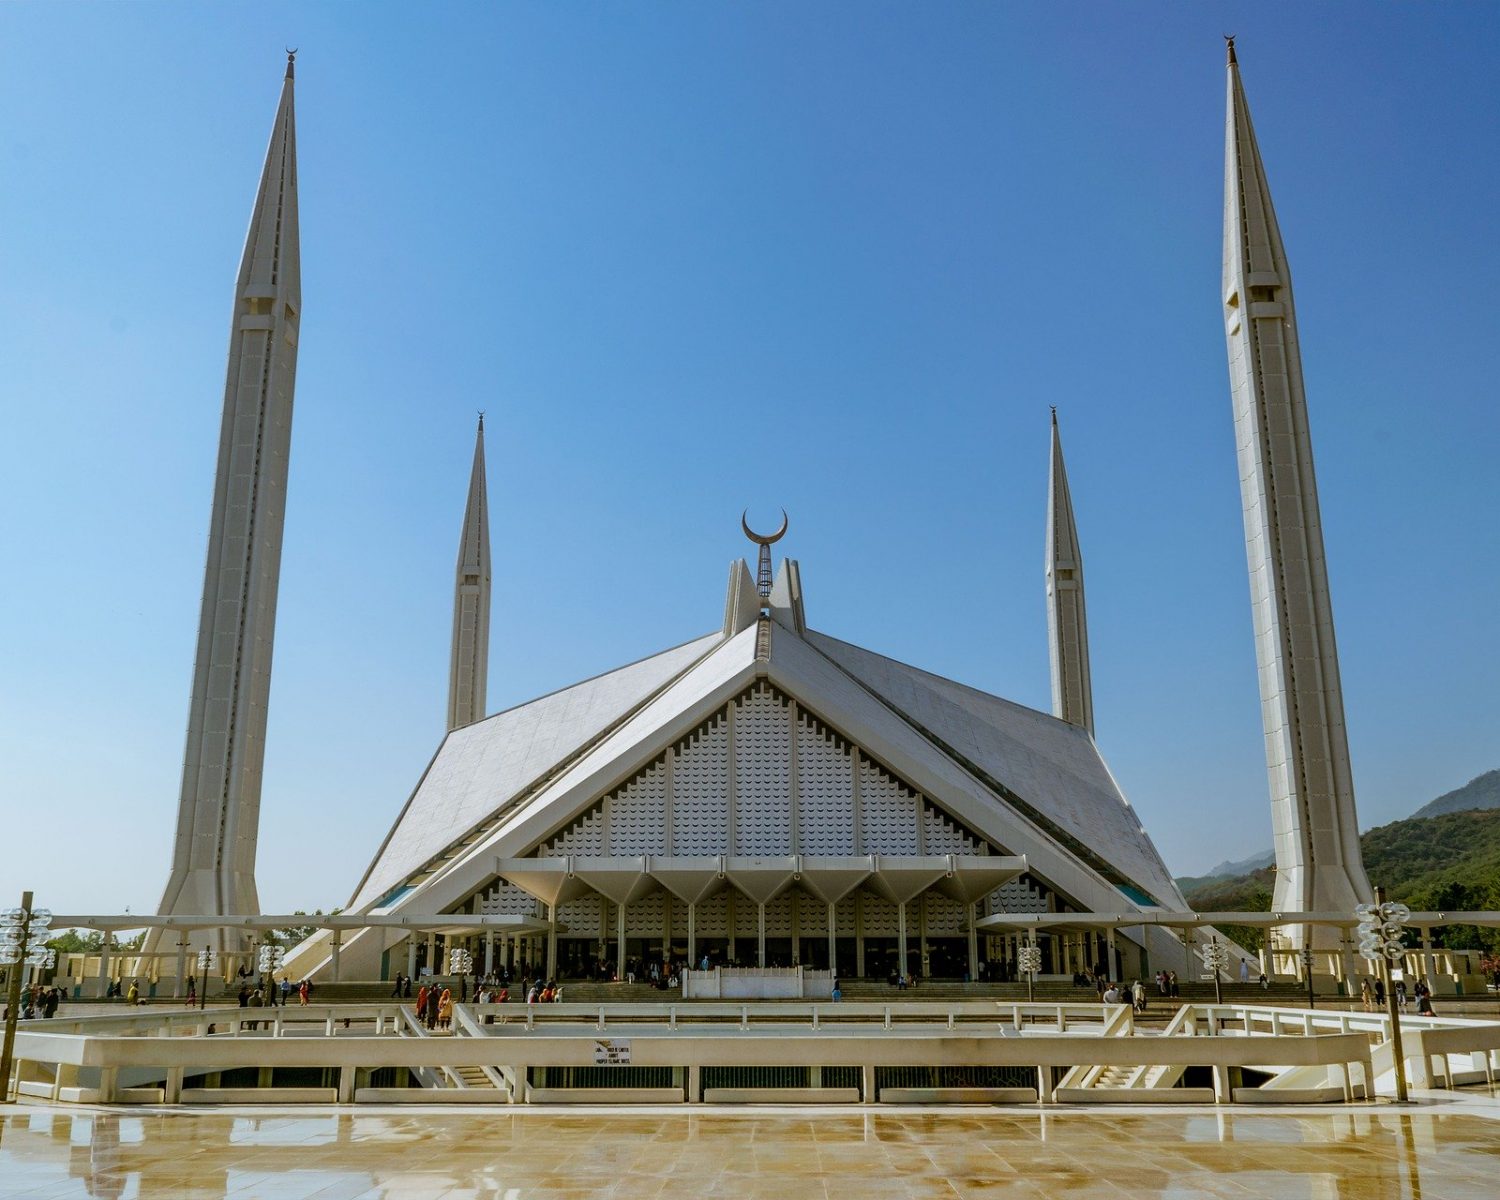 places to visit in islamabad